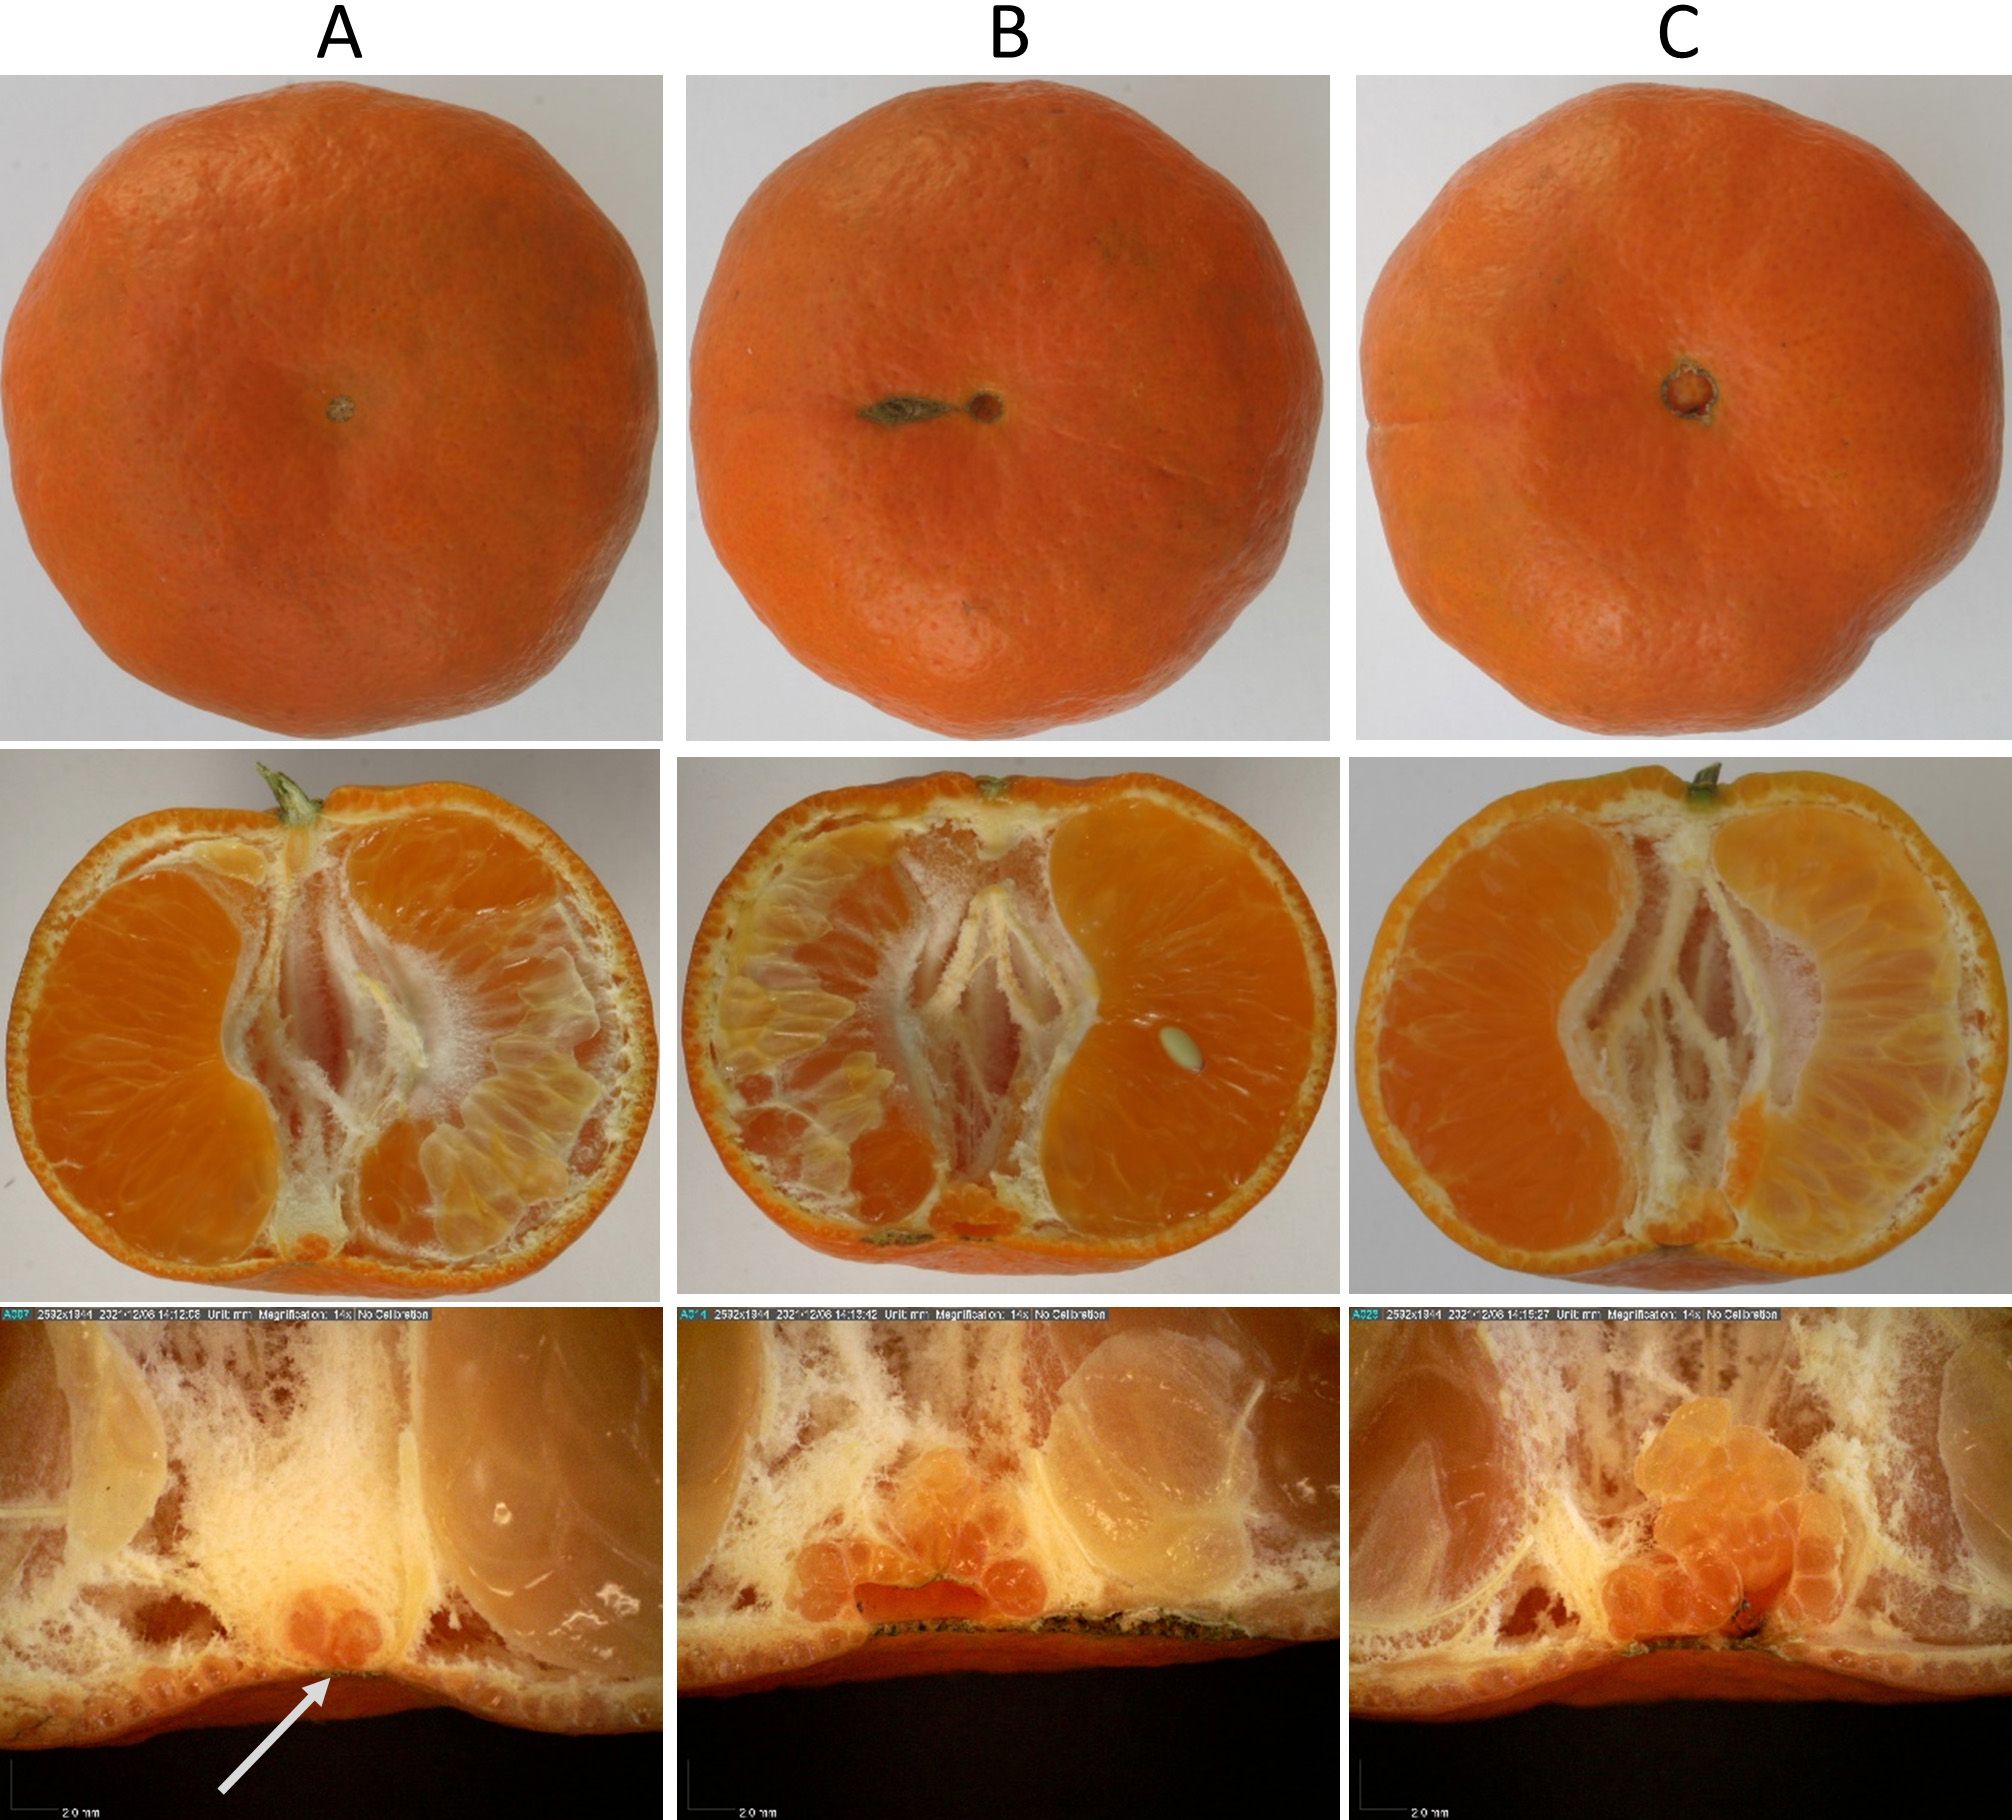 Variability in stylar end morphology of the navel in ‘Dancy’ mandarin fruit. Note the white arrow in the bottom left-hand image. Compare that spot across images but ignore the voids on either side. The mandarin in the lefthand column has a closed stylar end (at the arrow tip). 